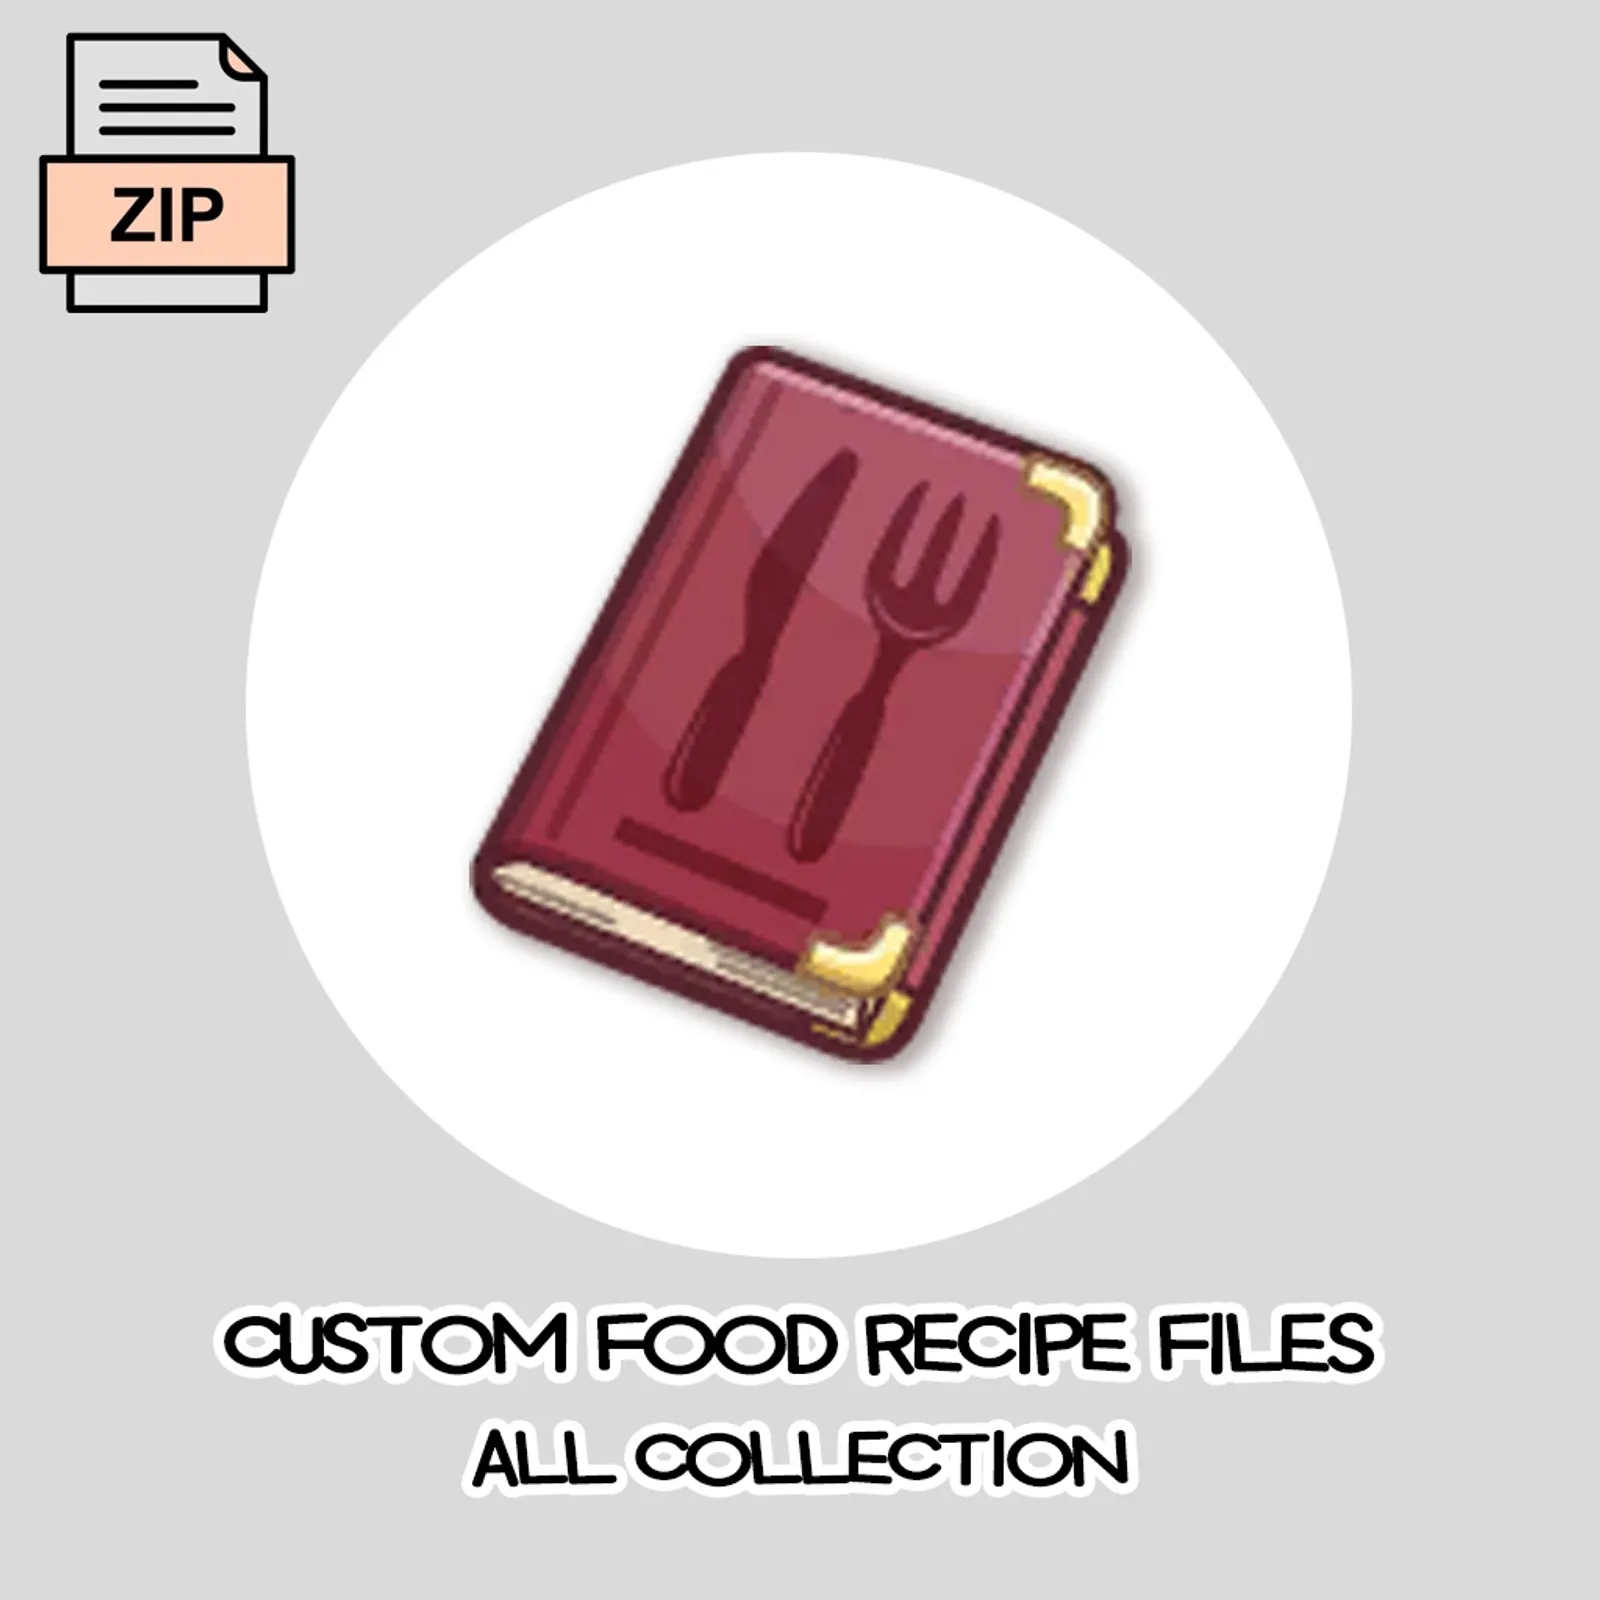 CUSTOM FOOD RECIPE FILES ALL COLLECTION